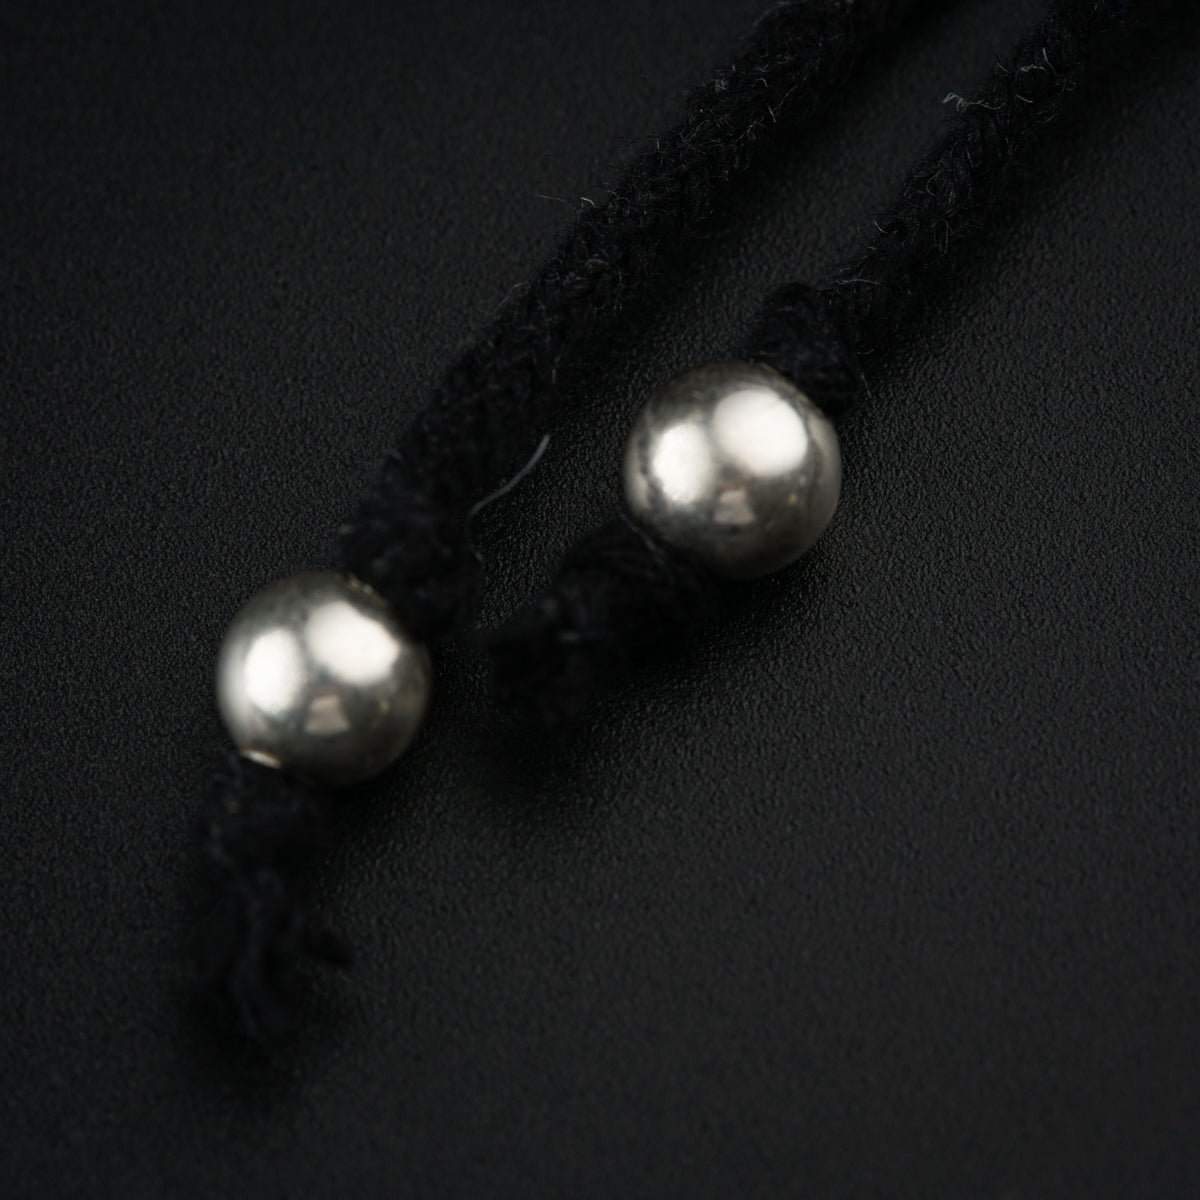 a close up of two pearls on a string